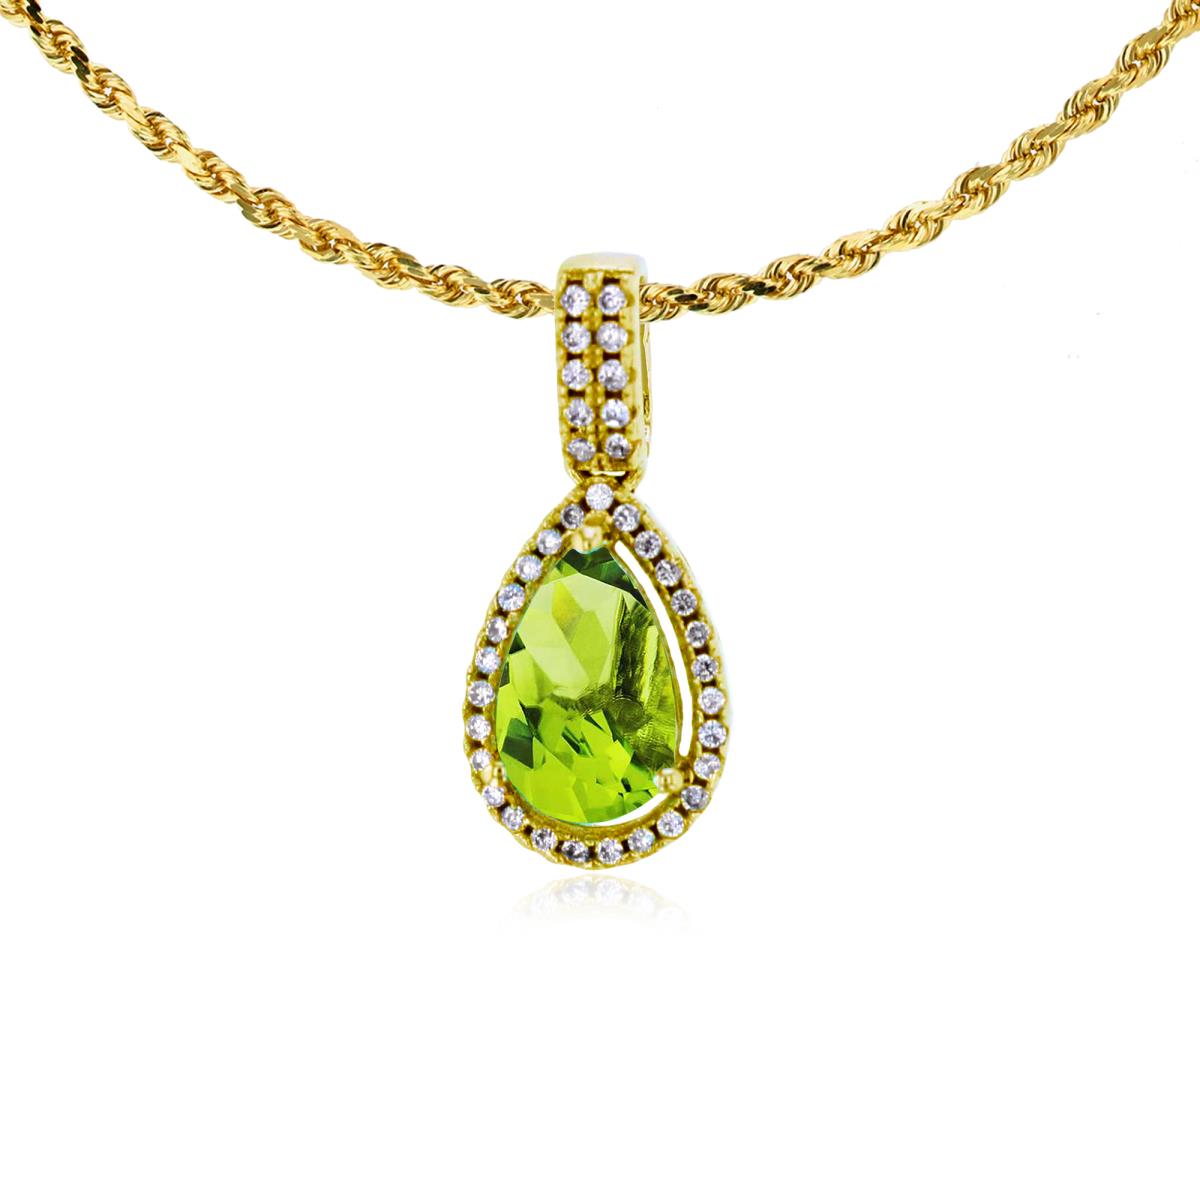 10K Yellow Gold 8x5mm Pear Cut Peridot & 0.11 CTTW Diamond Halo 18" Rope Chain Necklace